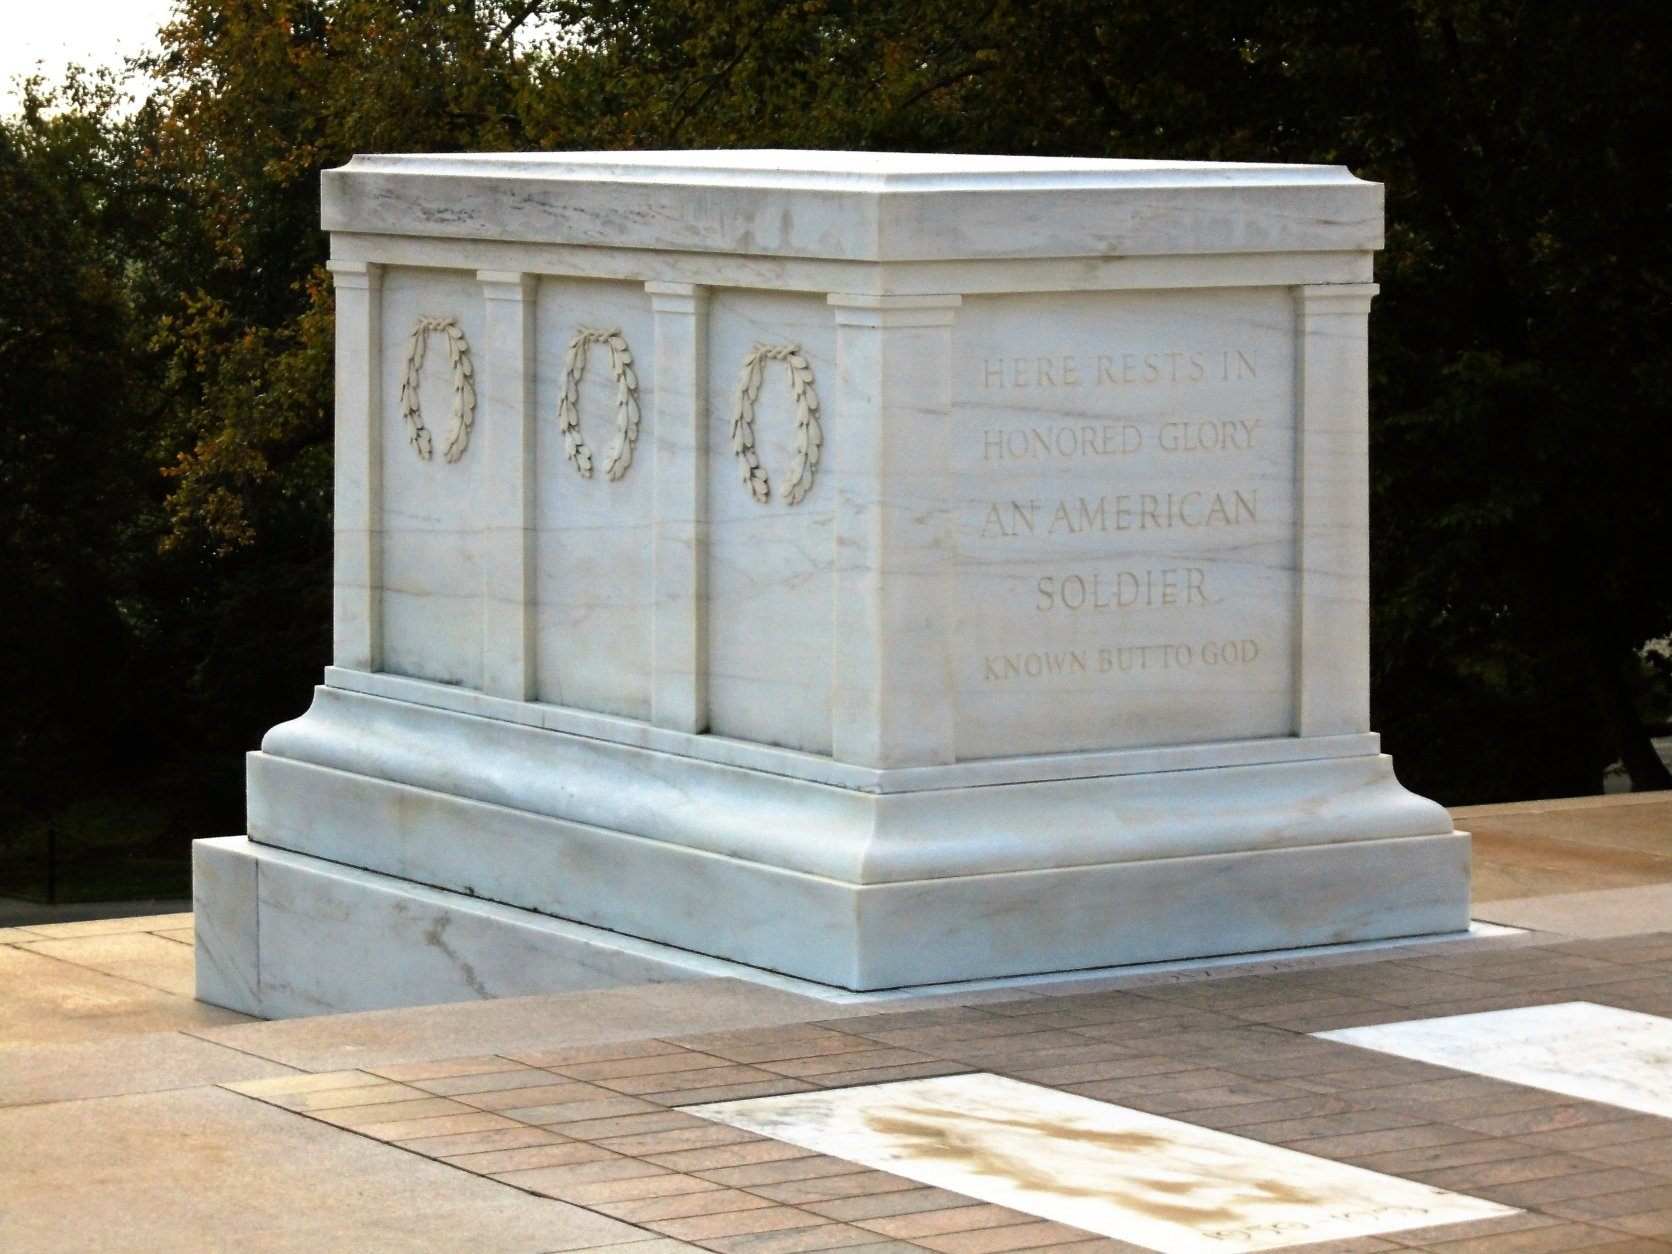 Tomb of the Unknown Soldier located in Arlington National Cemetery, Arlington, Virginia.